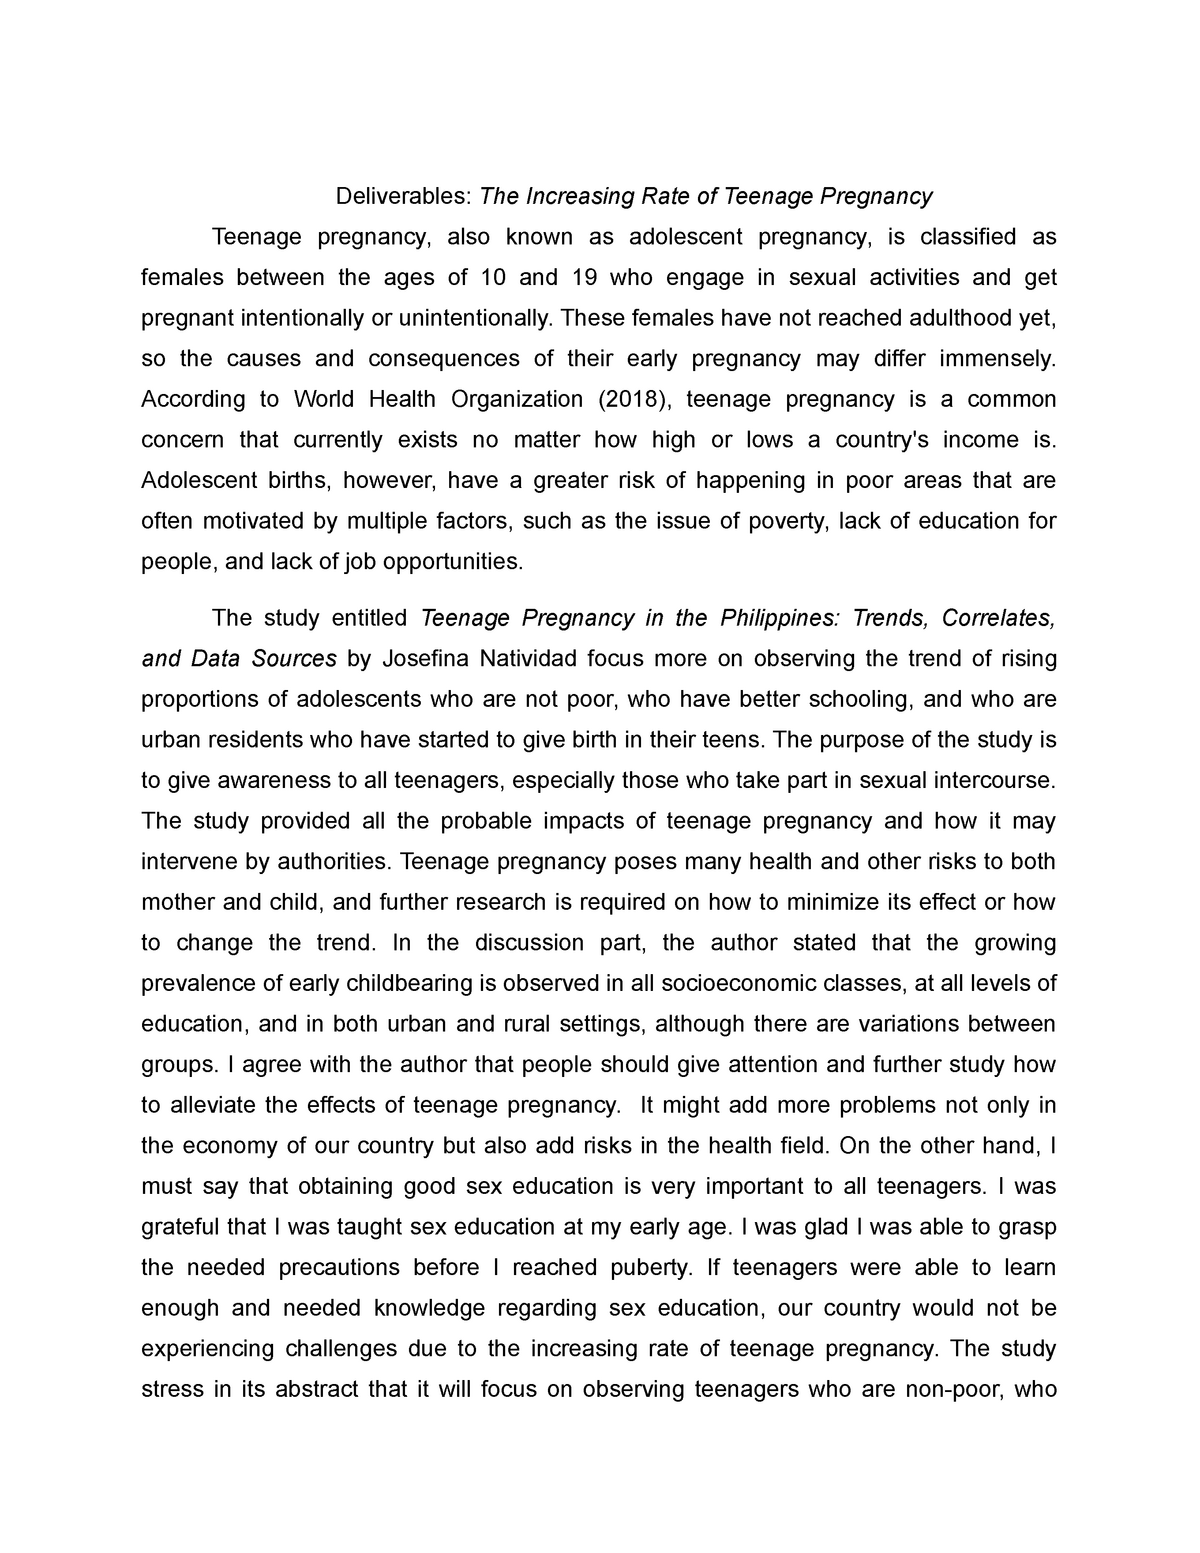 introduction of a research paper about teenage pregnancy